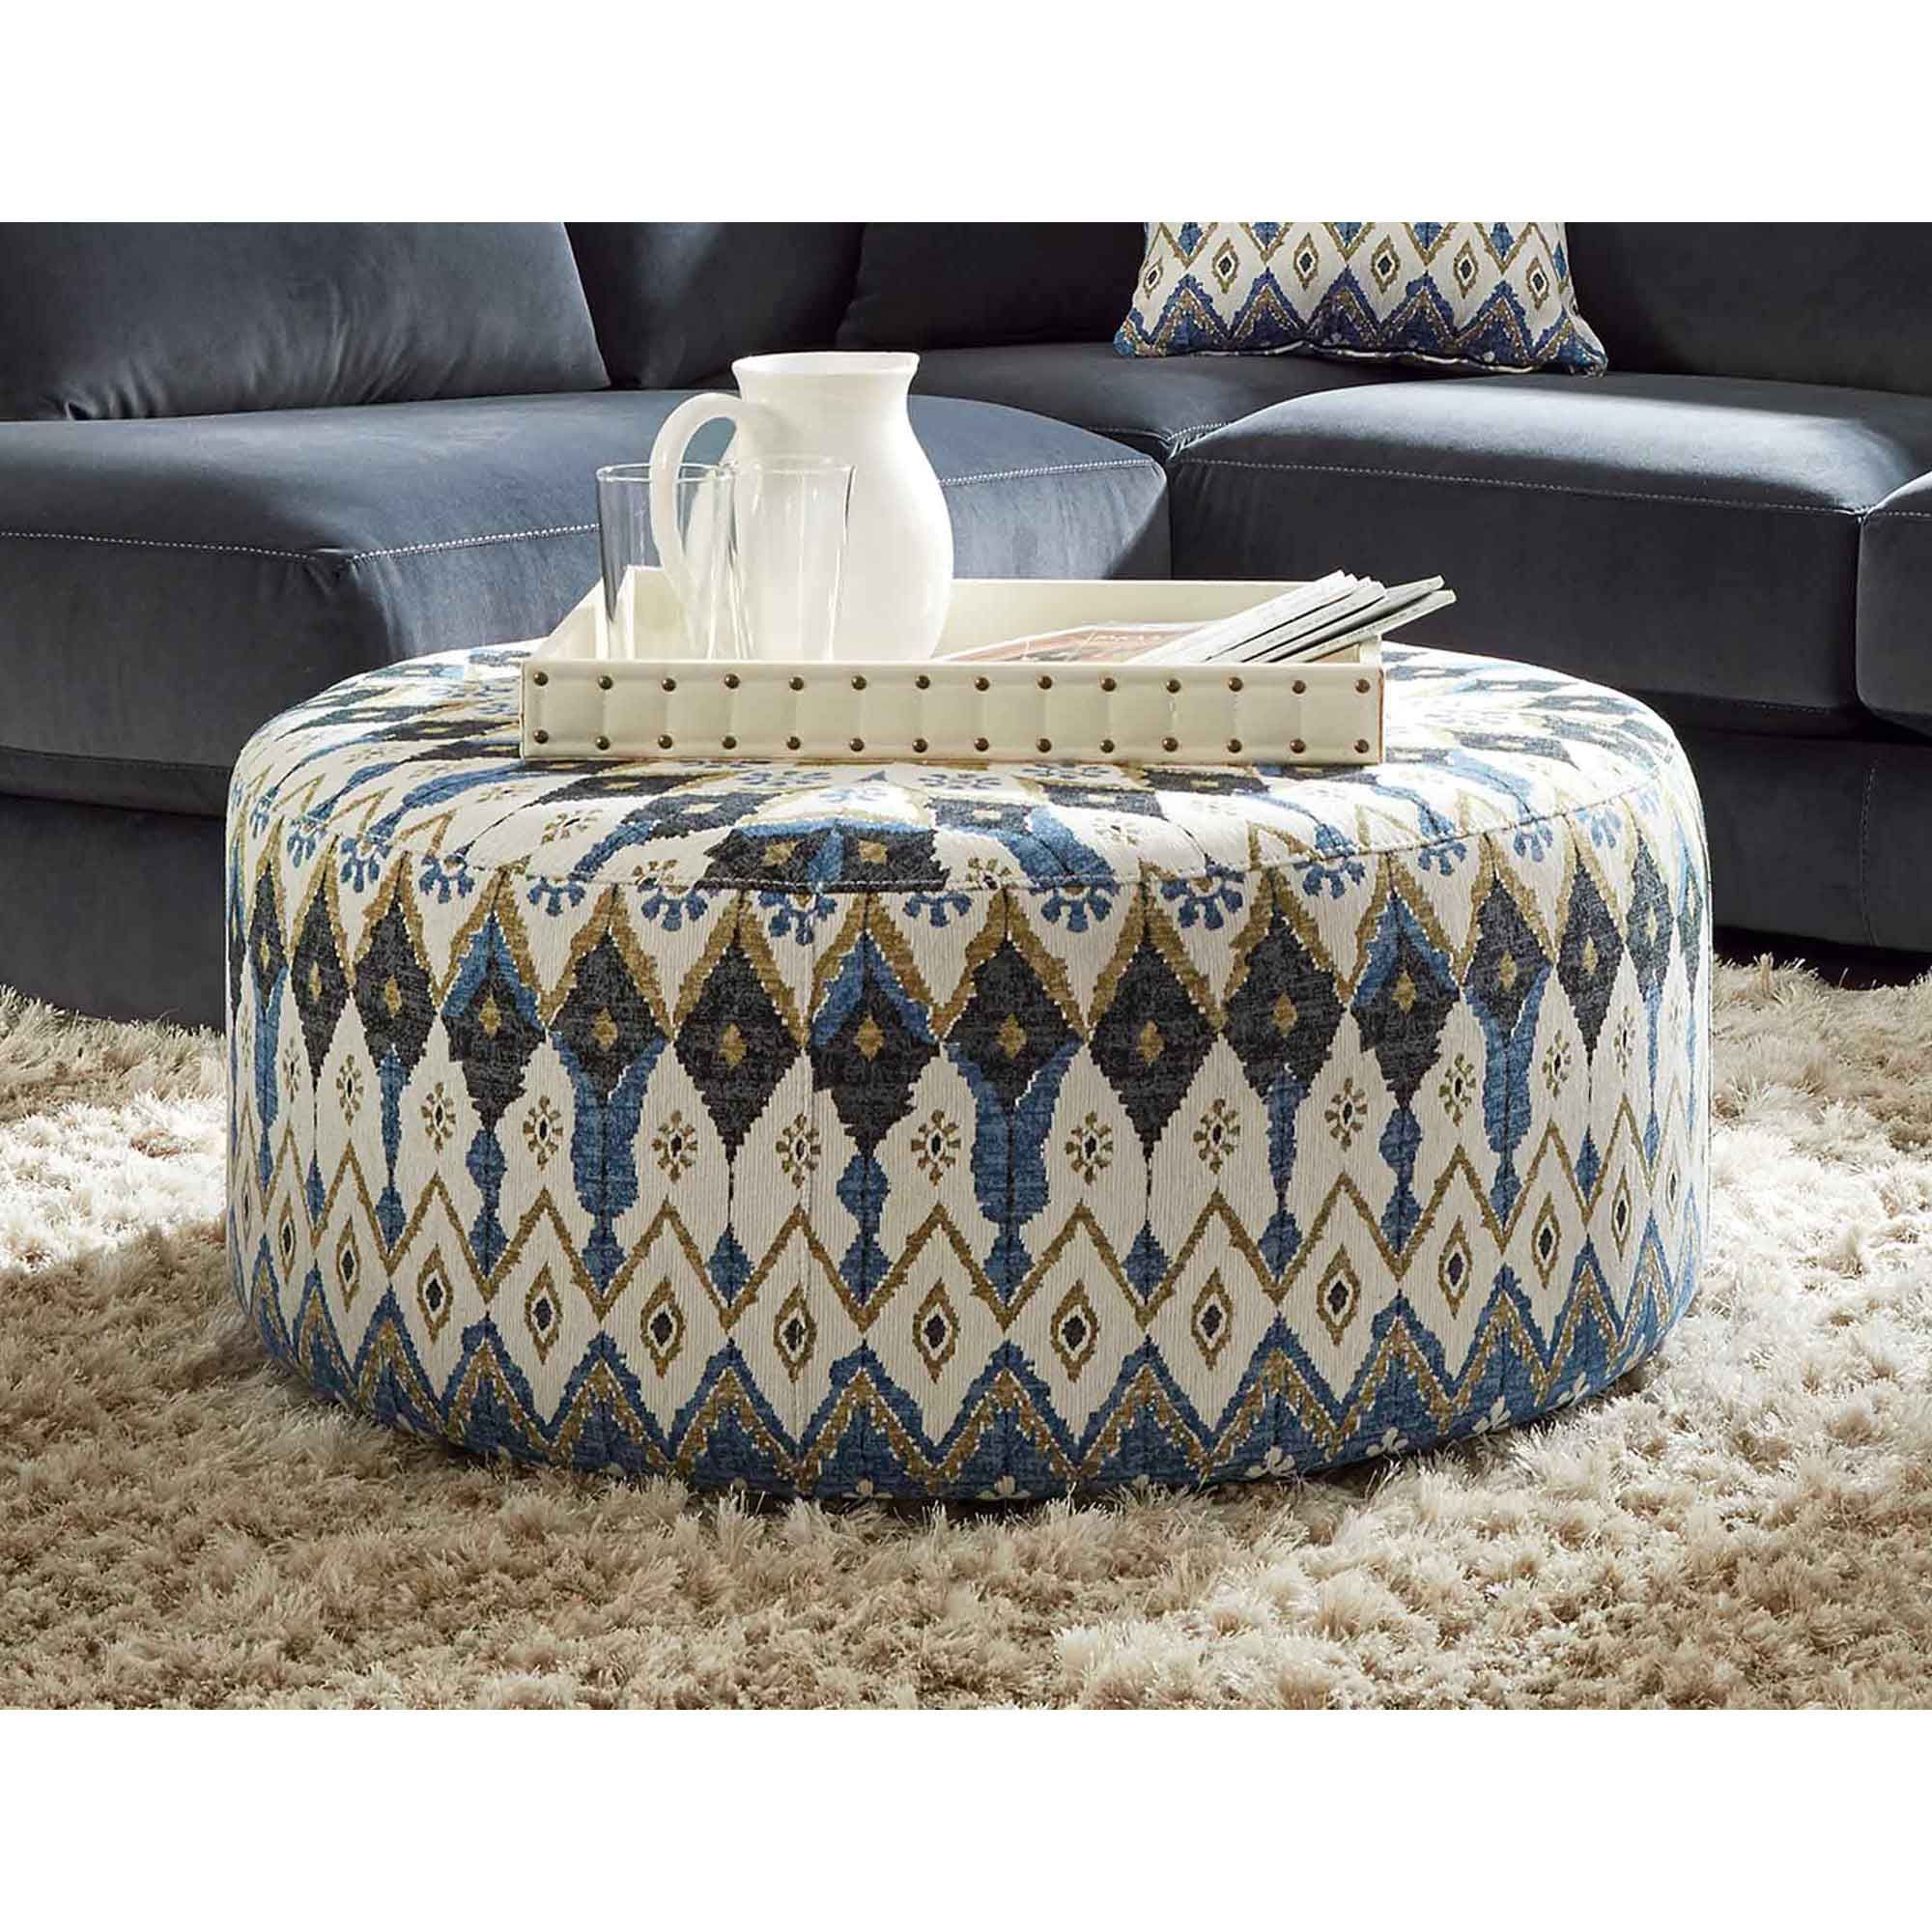 Most Recent 77618 Round Ottoman – Franklin Corporation In Round Pouf Ottomans (View 8 of 10)